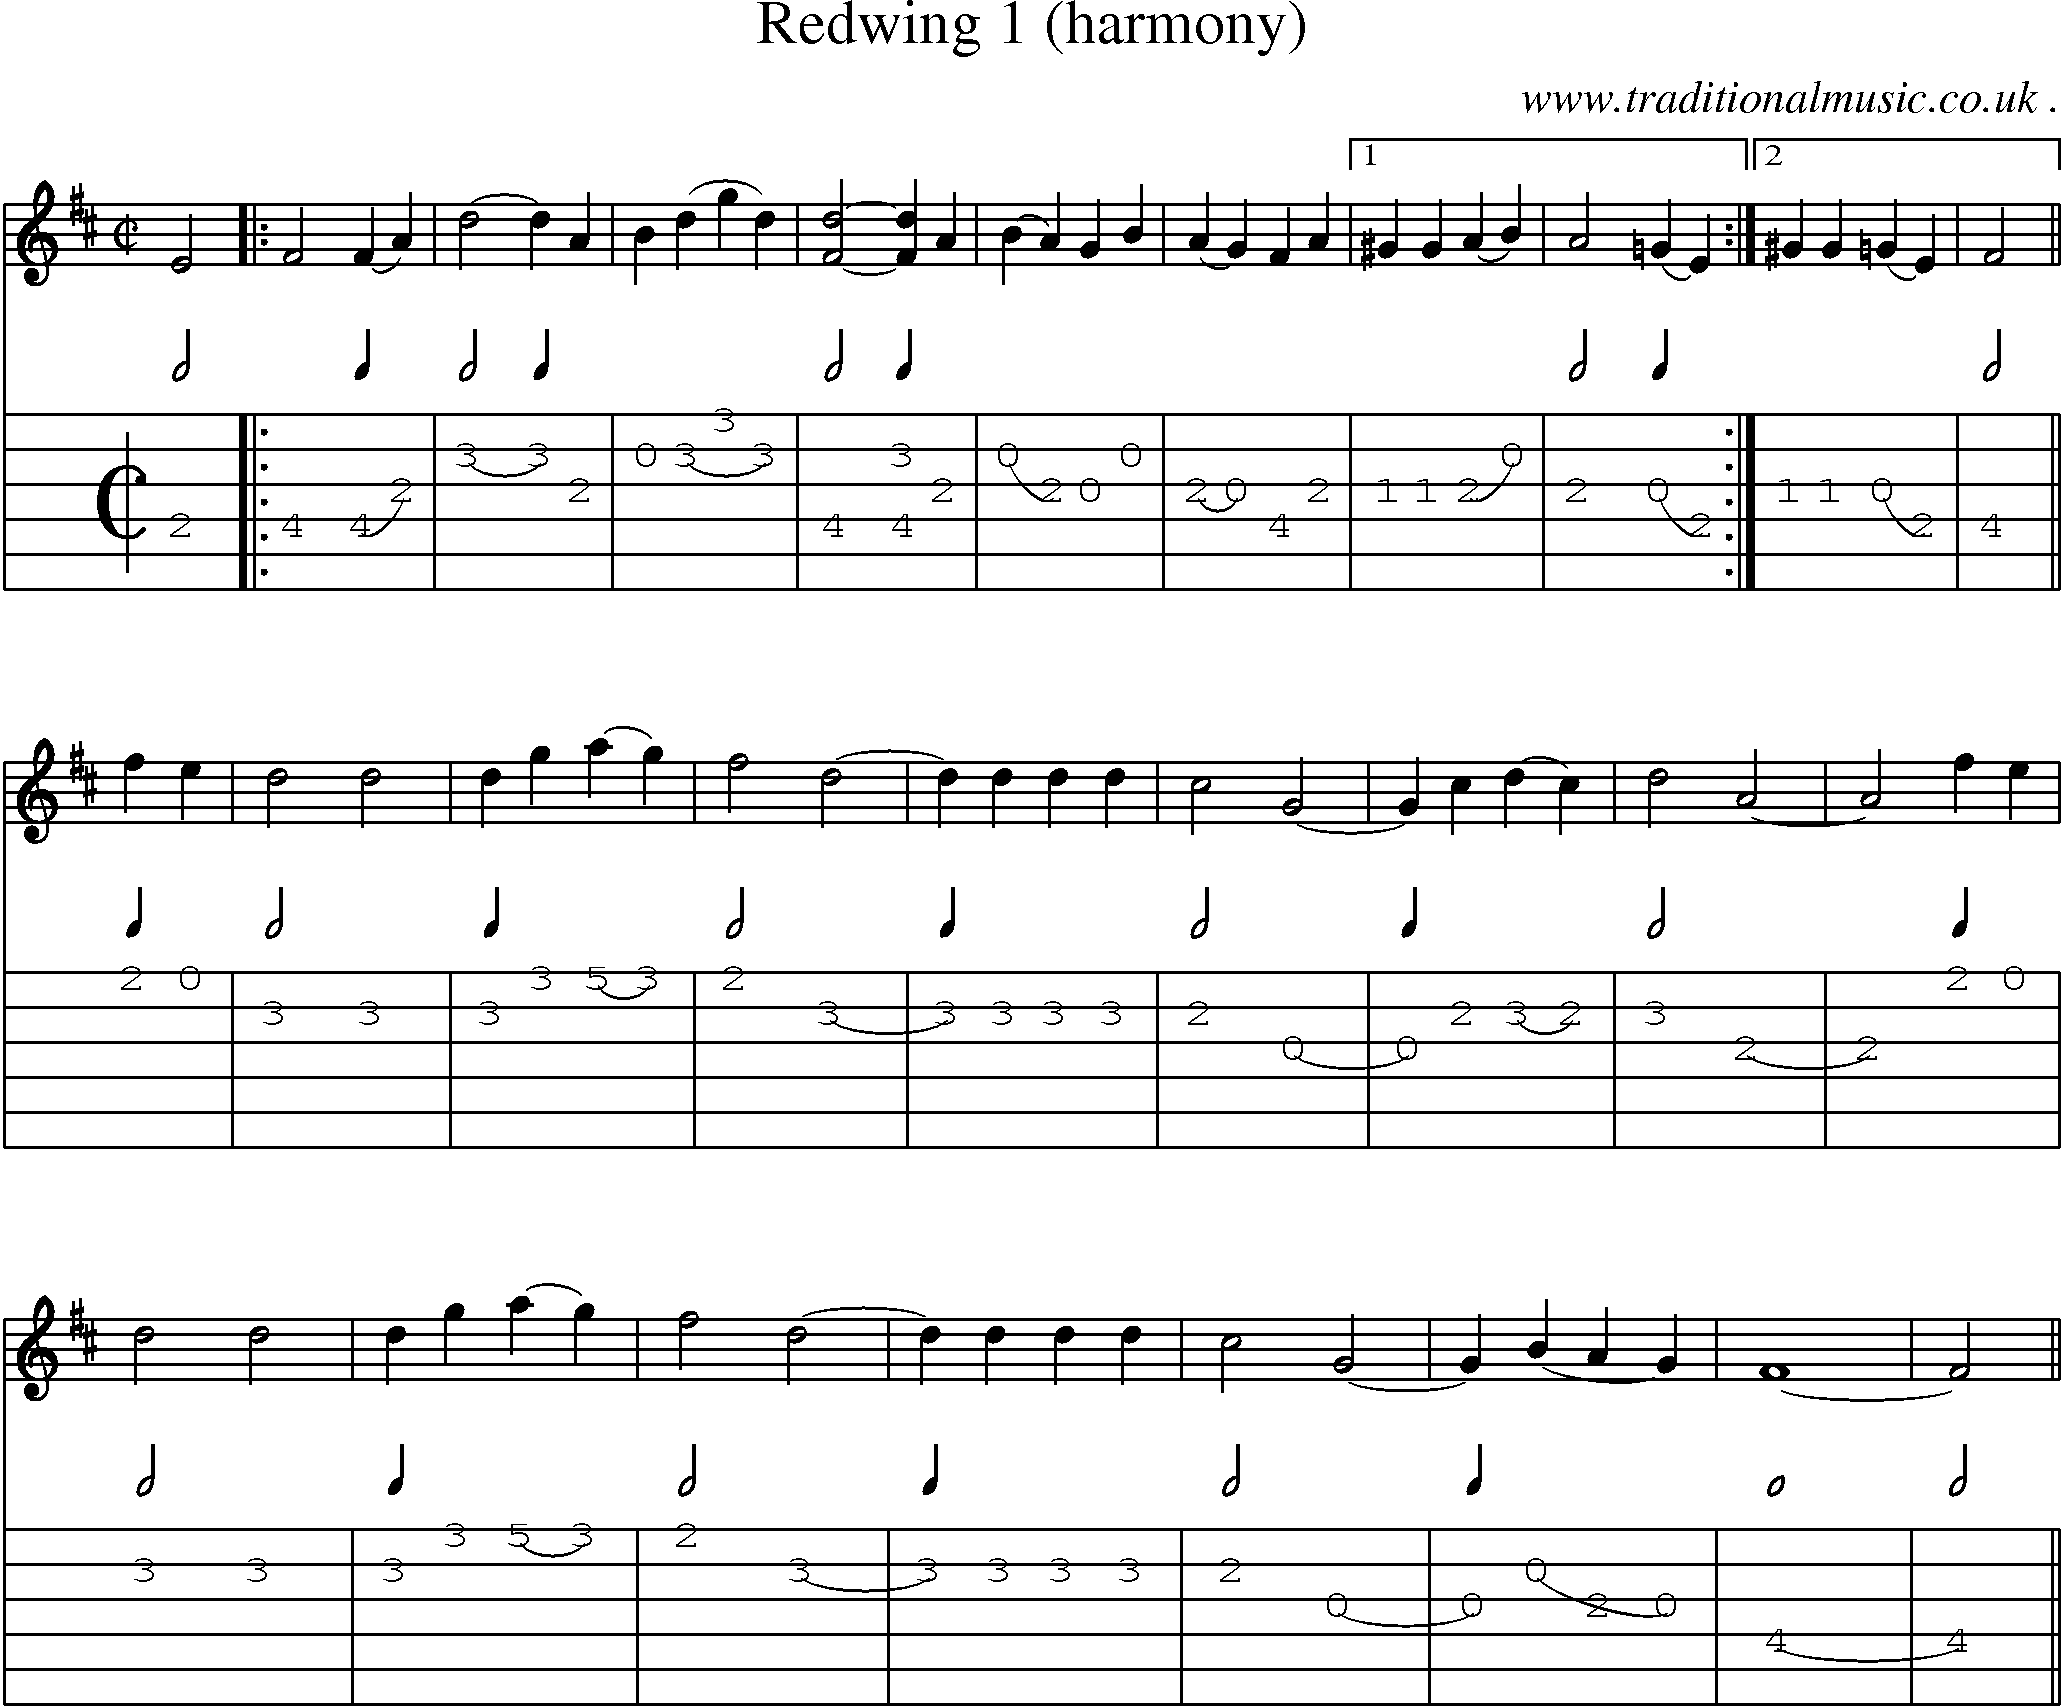 Music Score and Guitar Tabs for Redwing 1 (harmony)